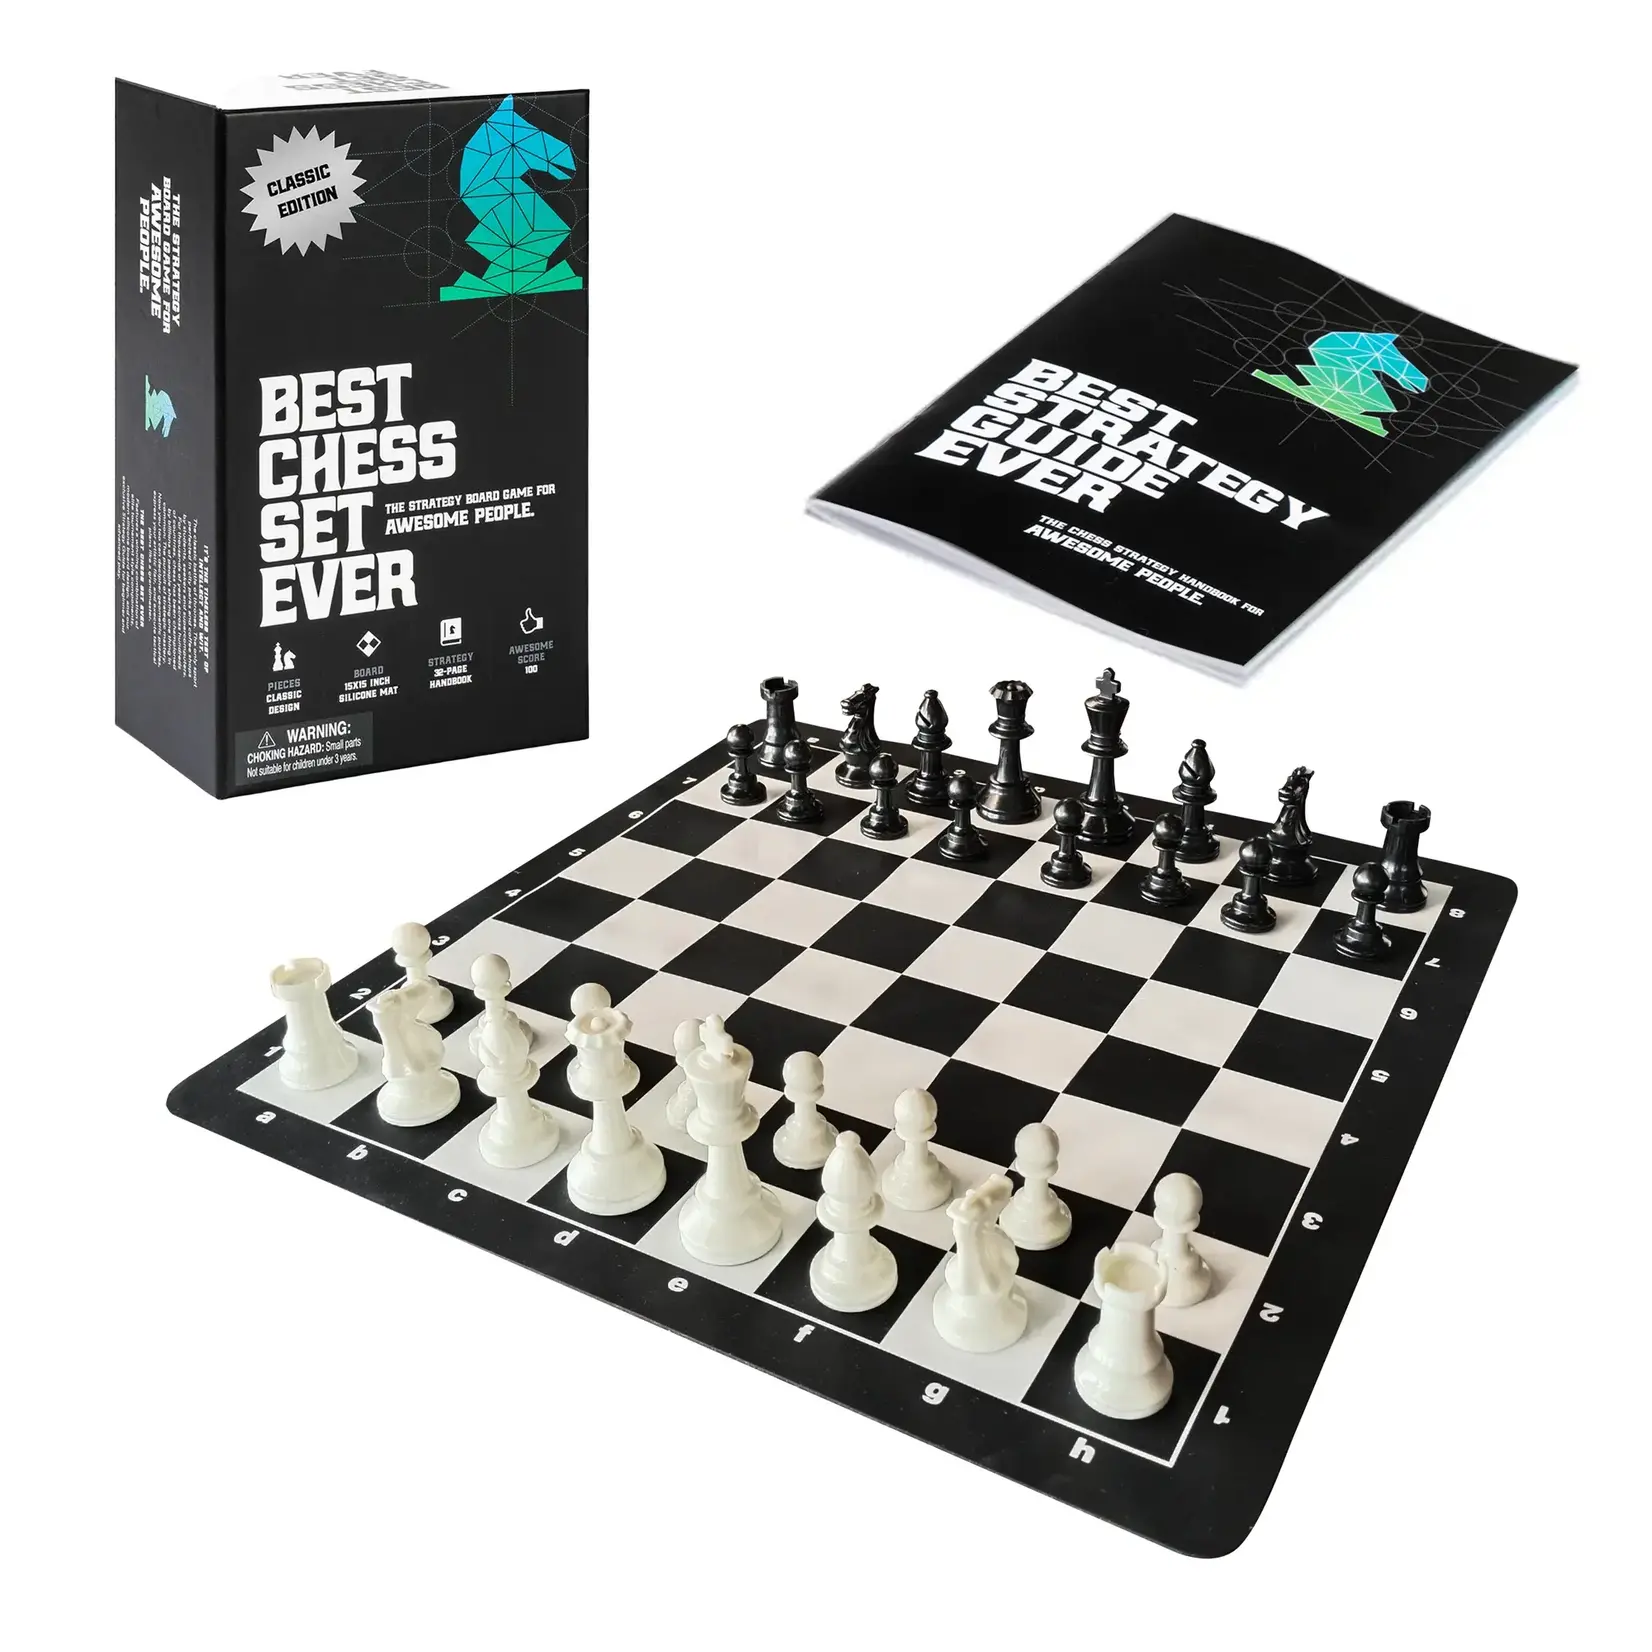 Best Chess Set Ever Best Chess Set Ever 1x Travel